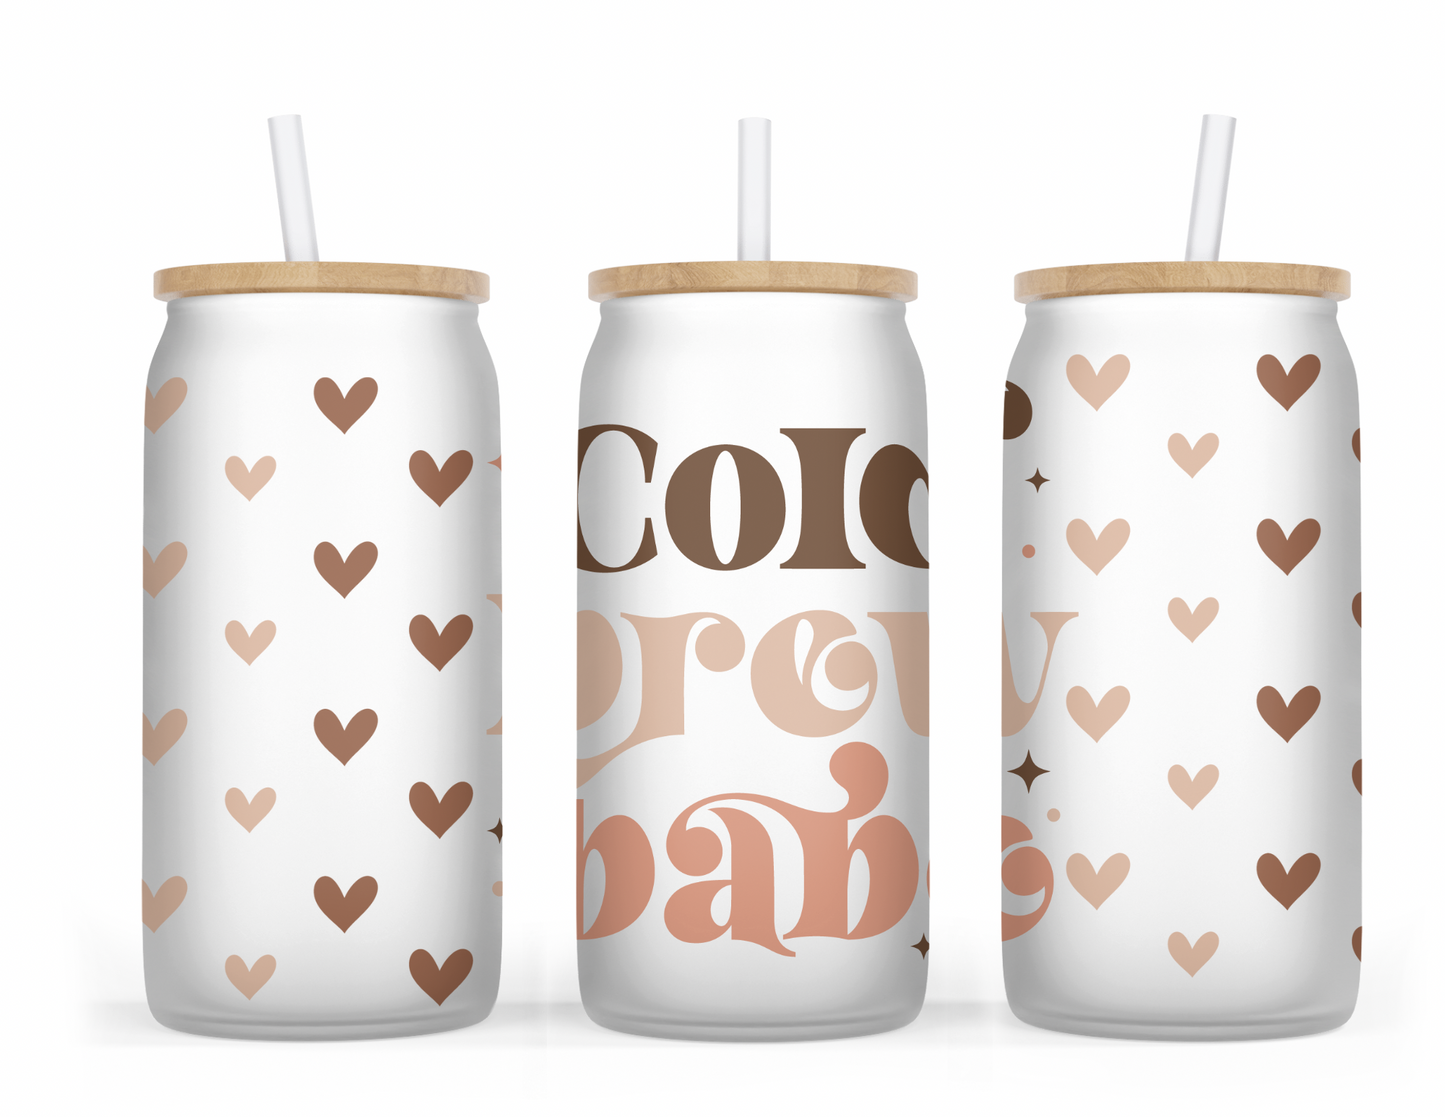 Cold Brew Babe 16oz Frosted Glass Cup